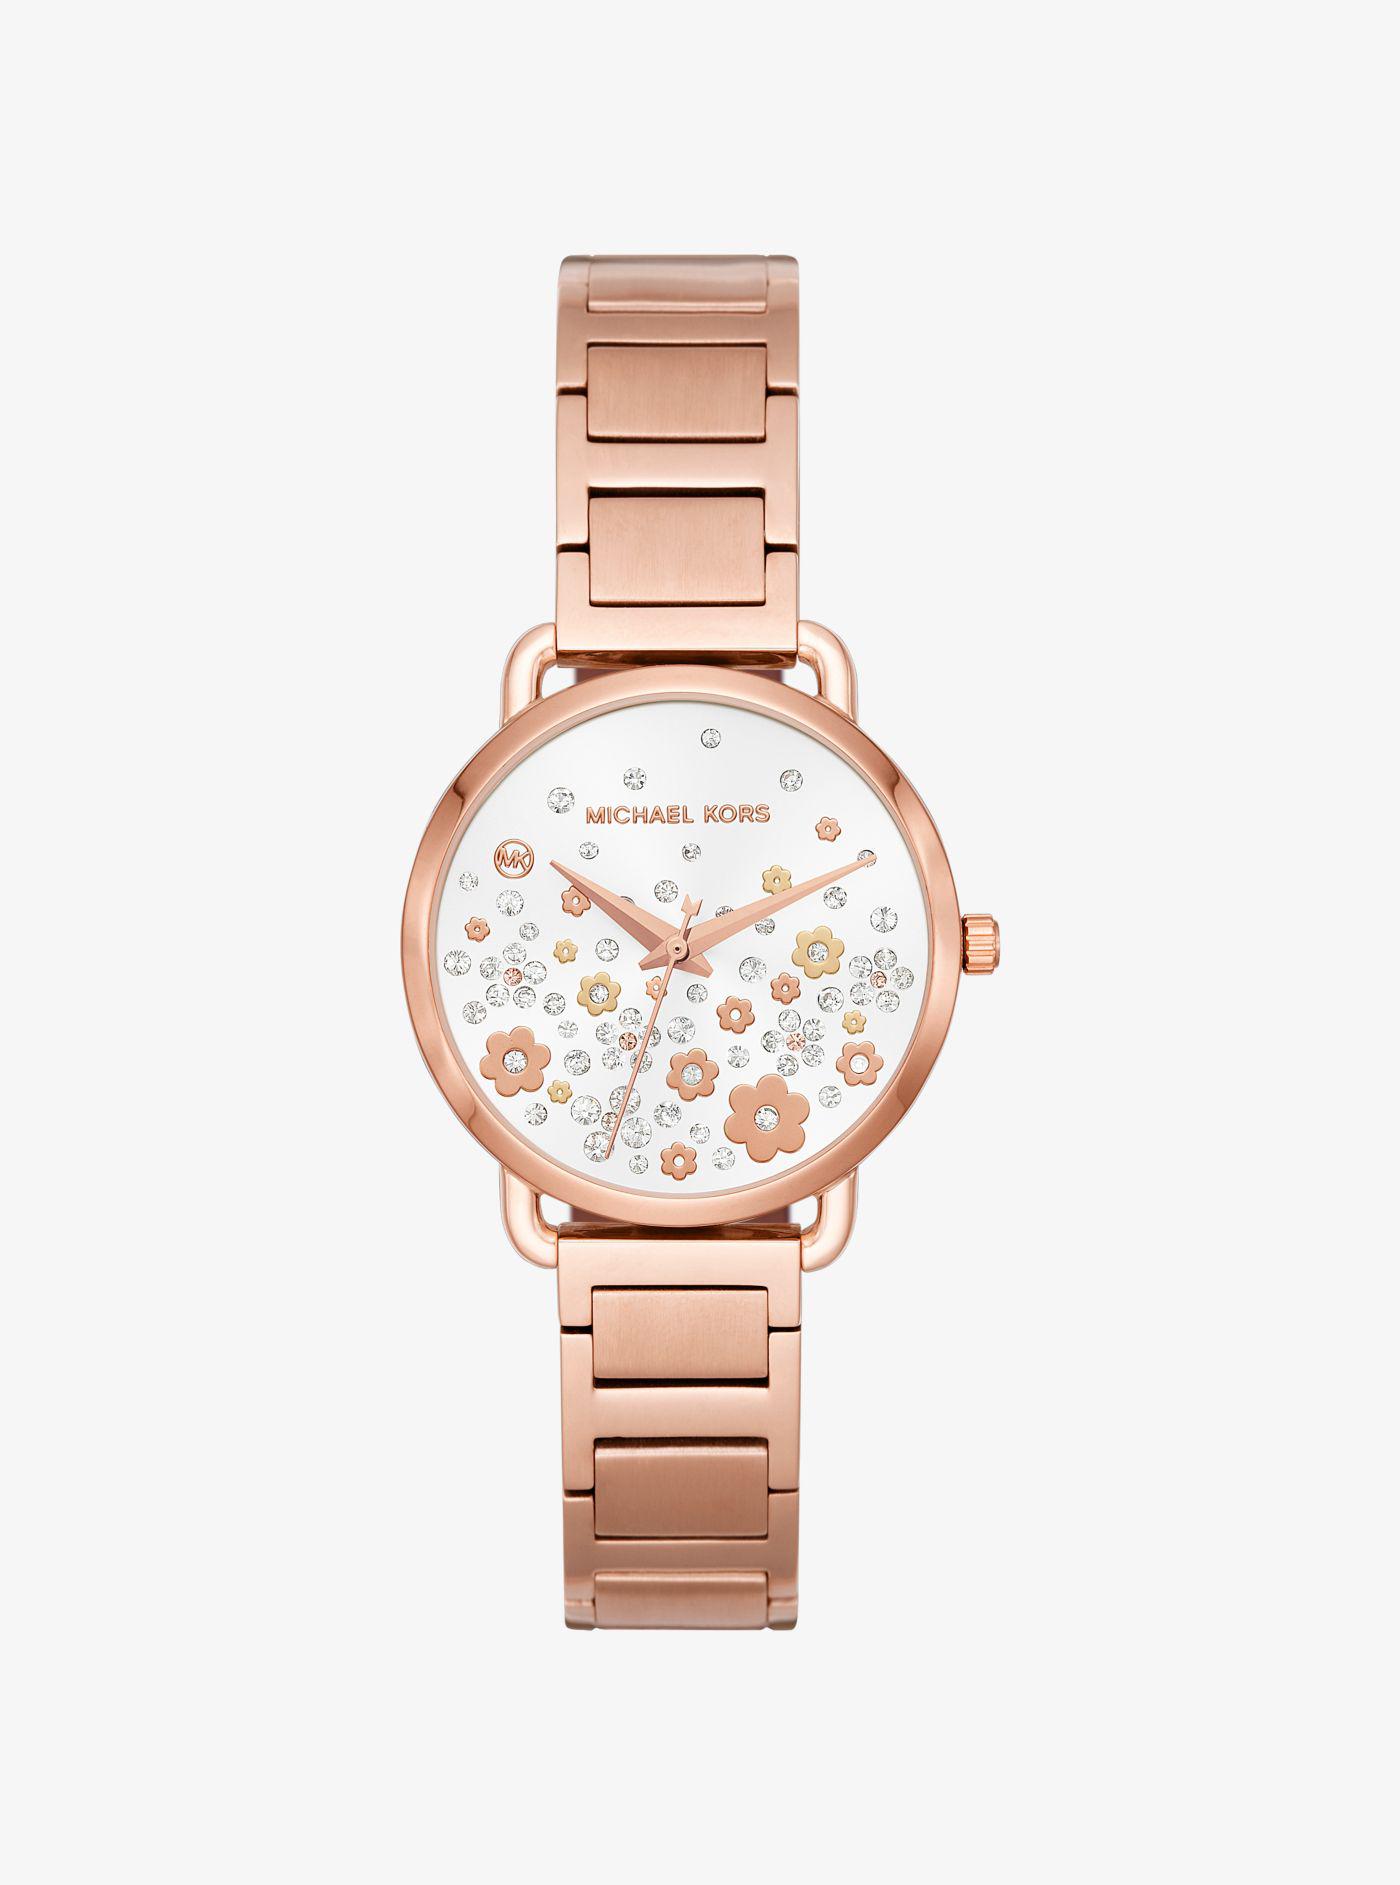 Michael Kors Pavé Watch in Rose Gold (Pink) - Lyst